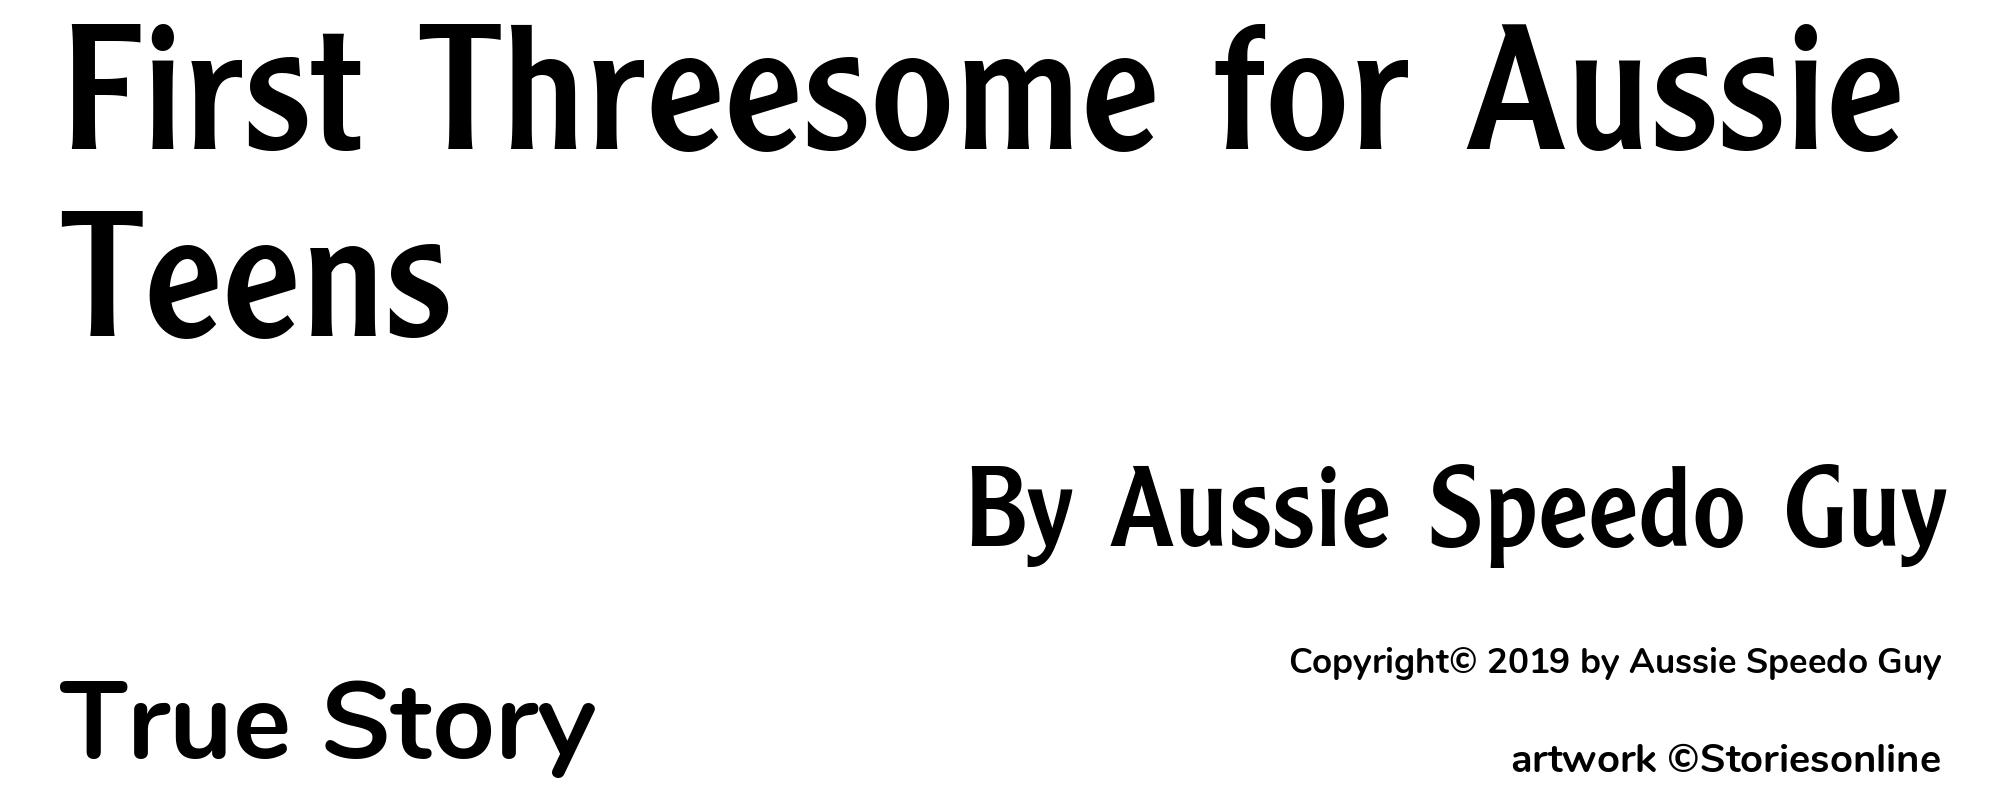 First Threesome for Aussie Teens - Cover